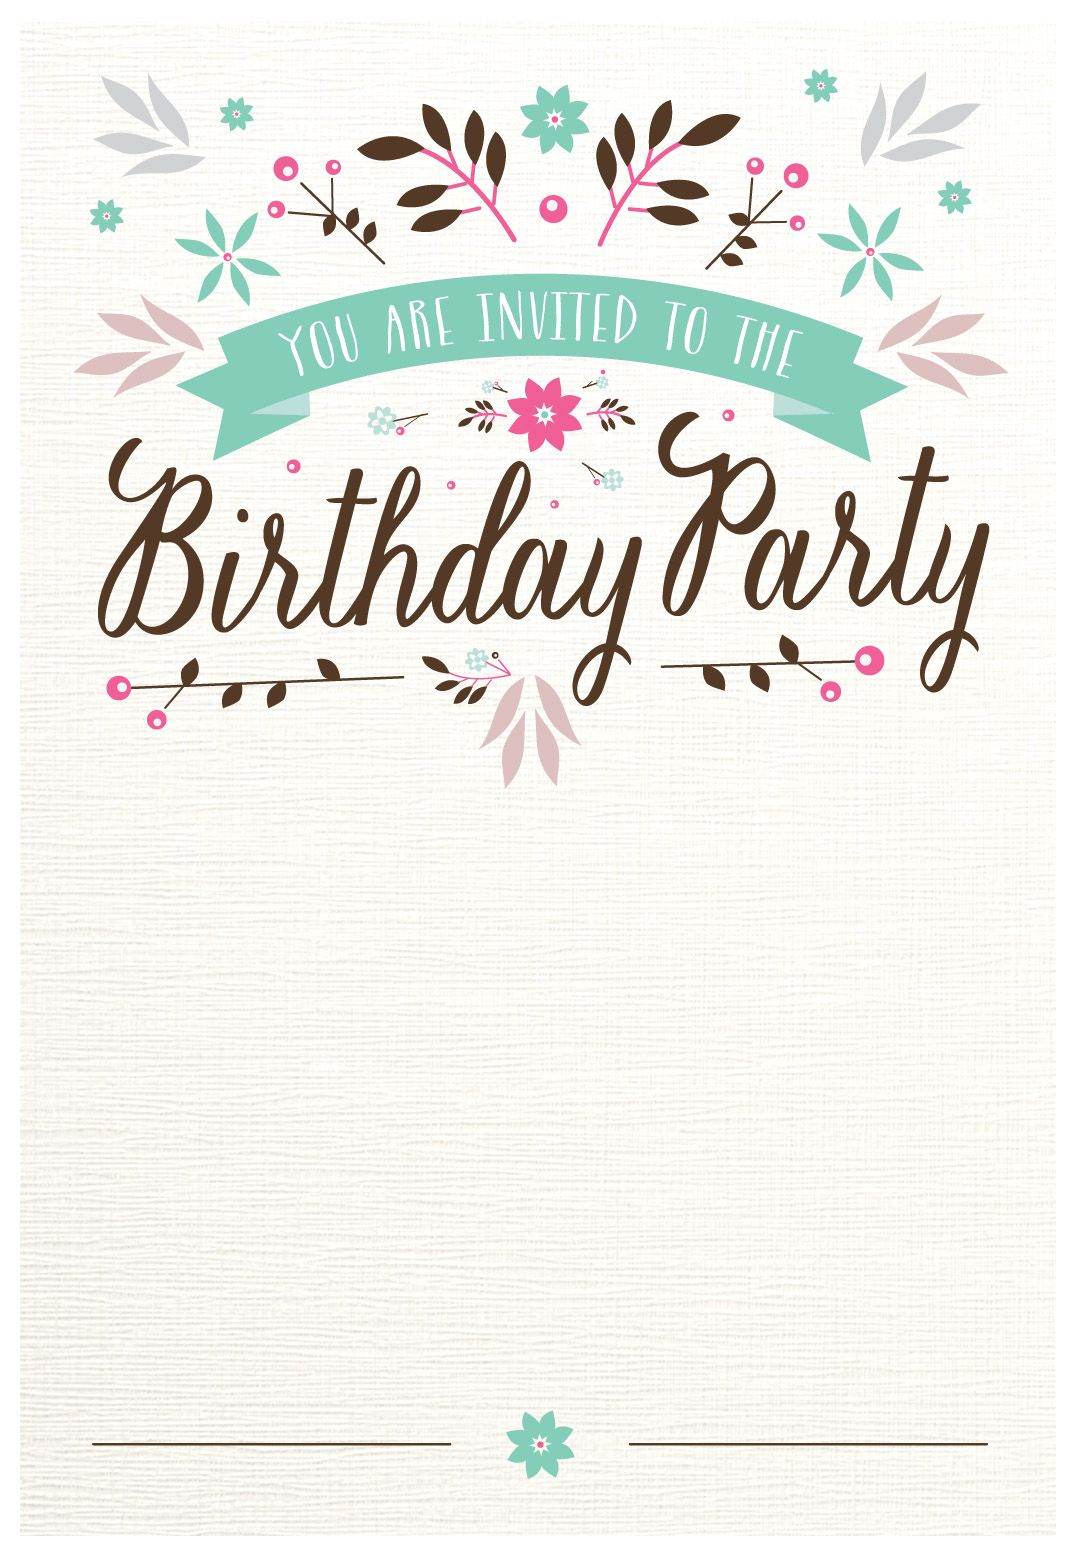 Flat Floral Free Printable Birthday Invitation Template within dimensions 1080 X 1560